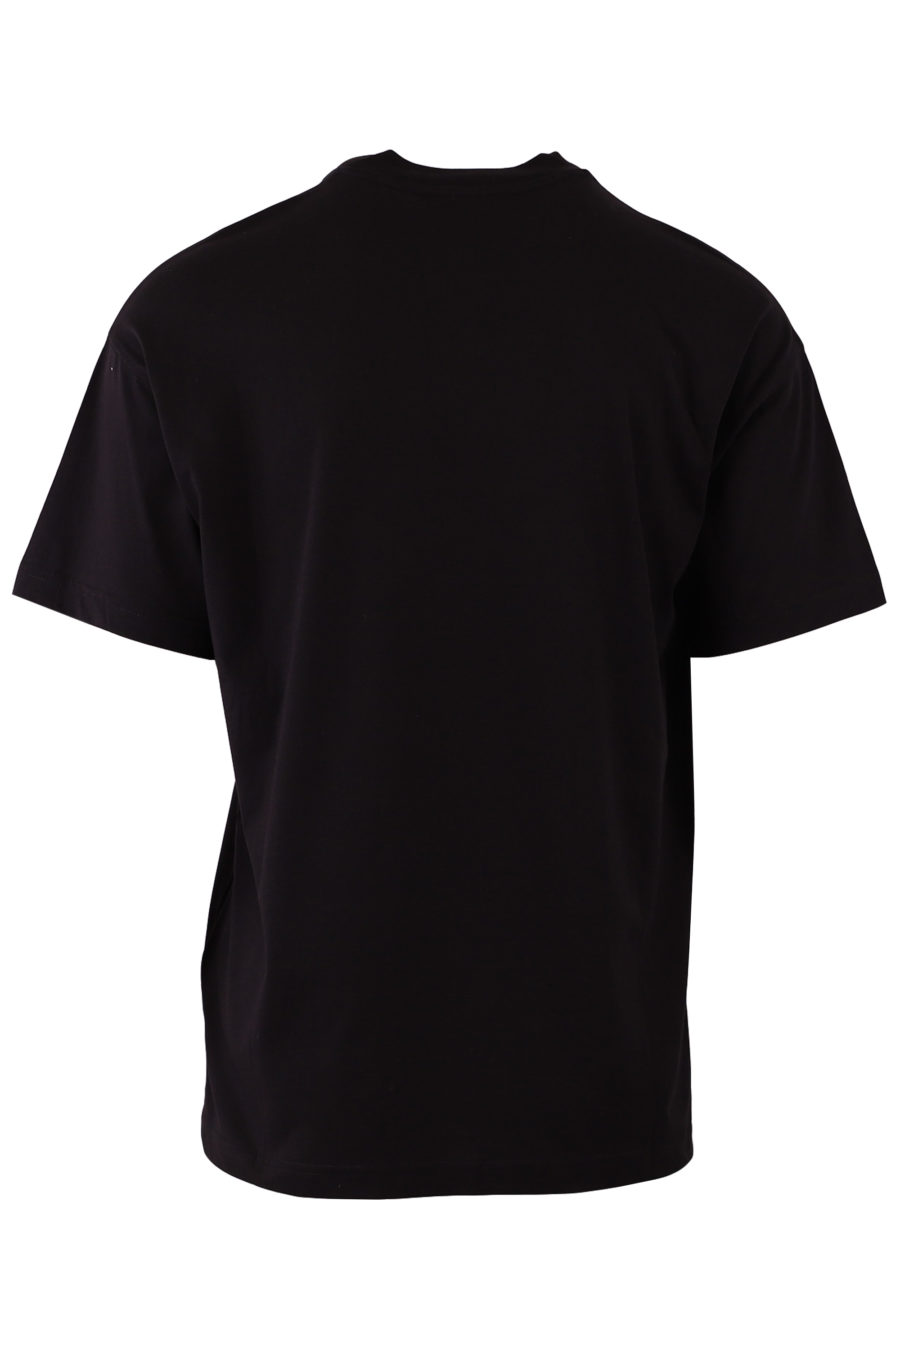 Black T-shirt with red and white logo - c742a174ef84f0379f8c6181254770c75b057efc